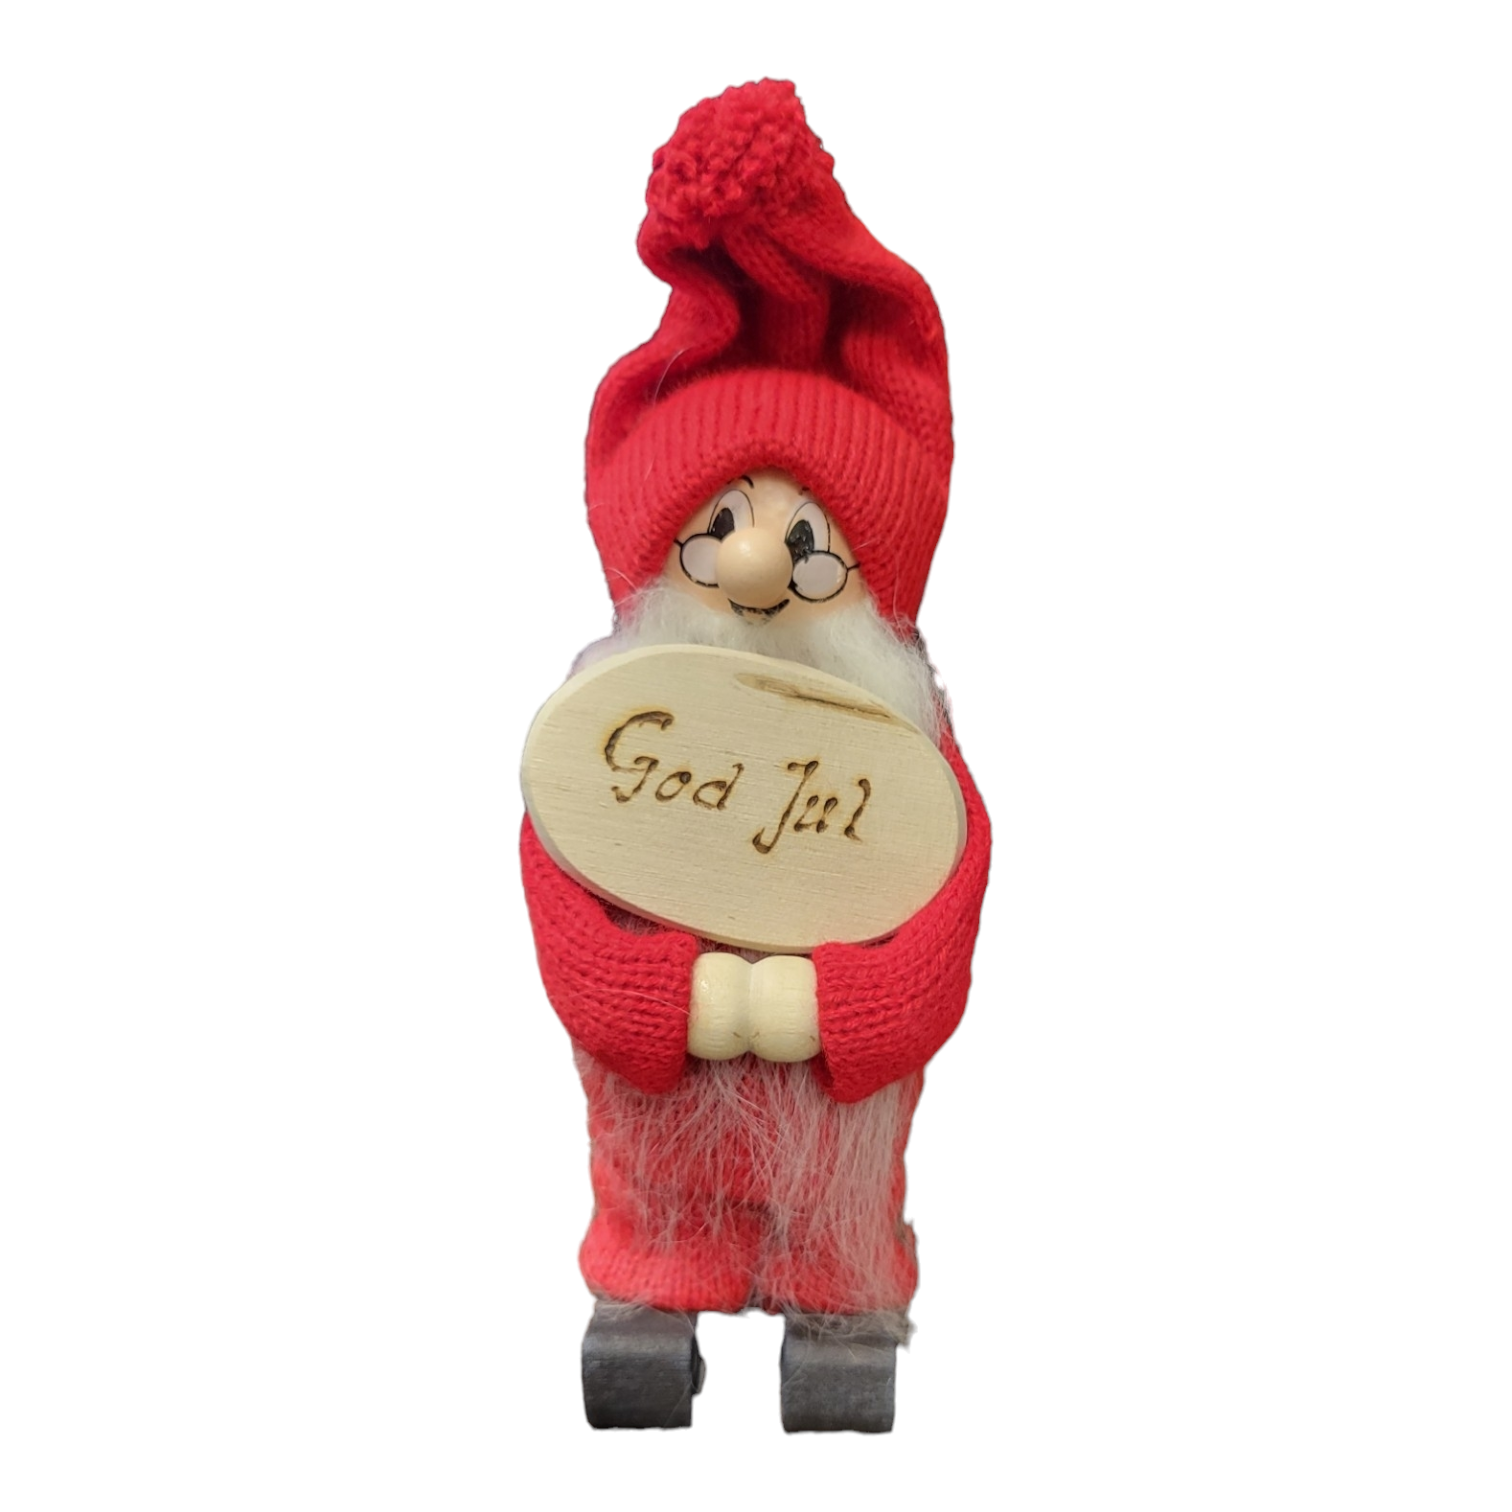 Figurine: Tomte with God Jul Sign